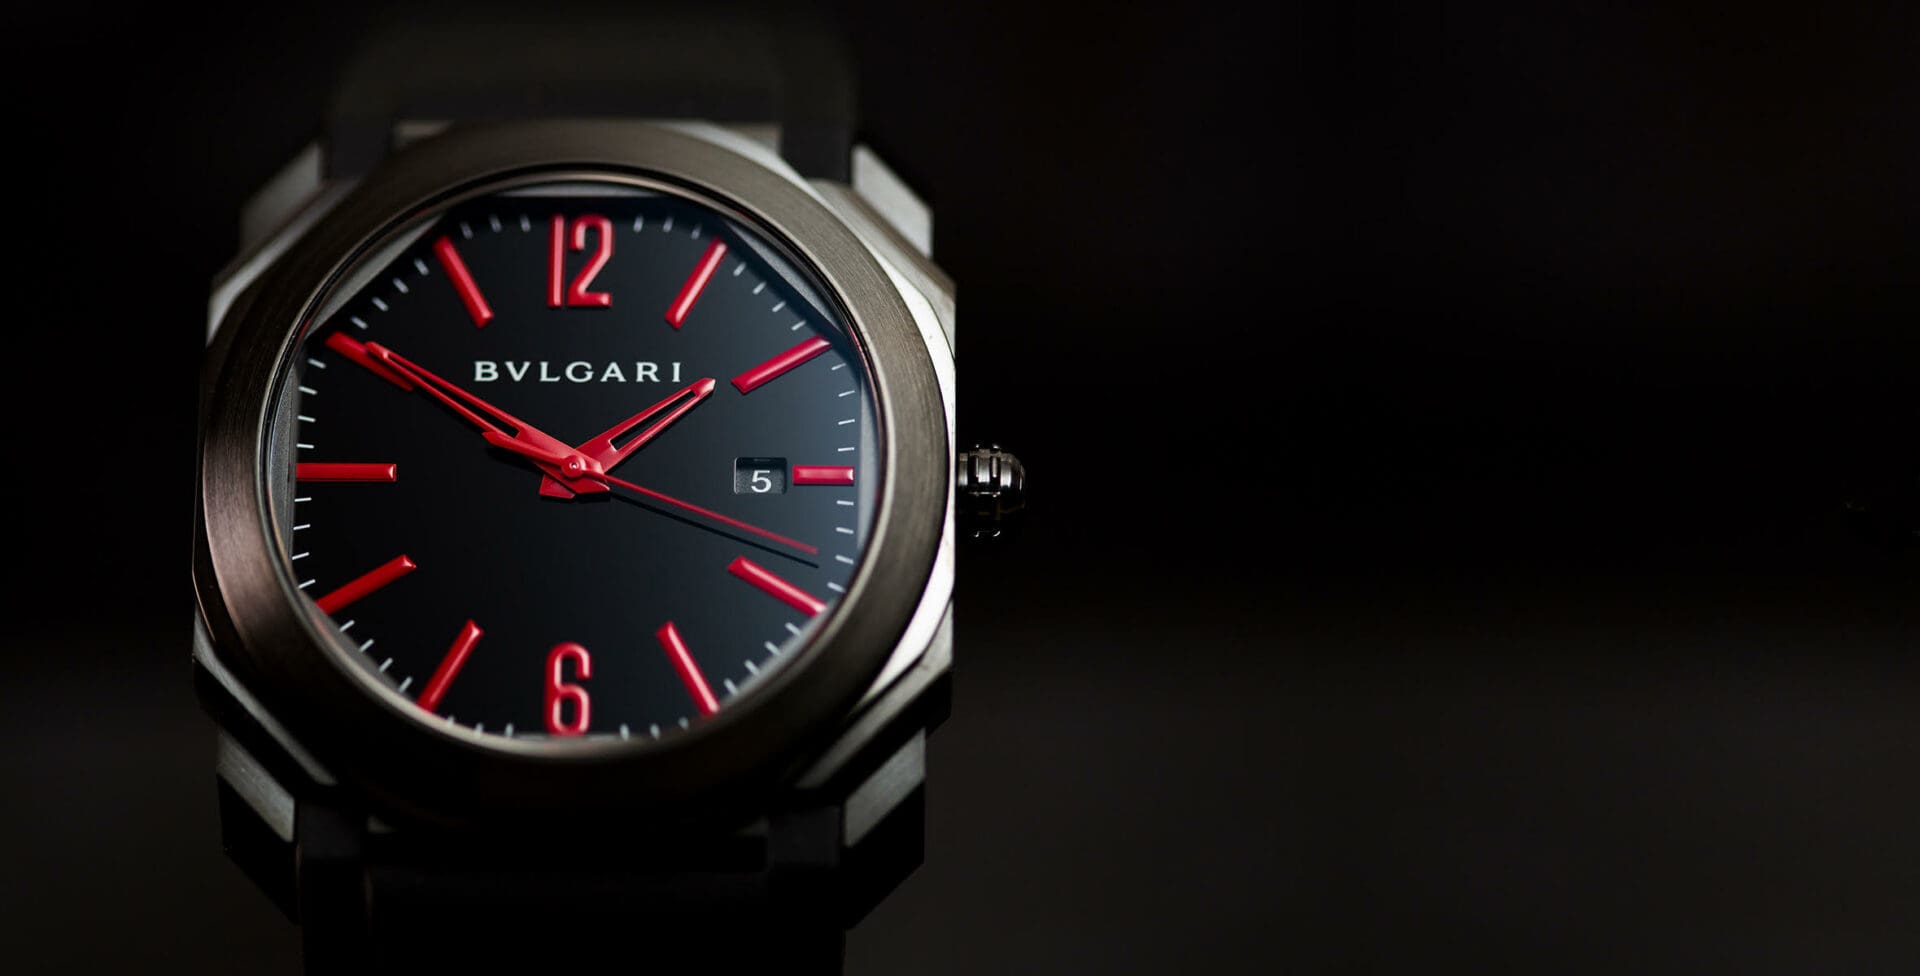 EDITOR’S PICK: Bulgari shows their dangerous side with the Octo Ultranero